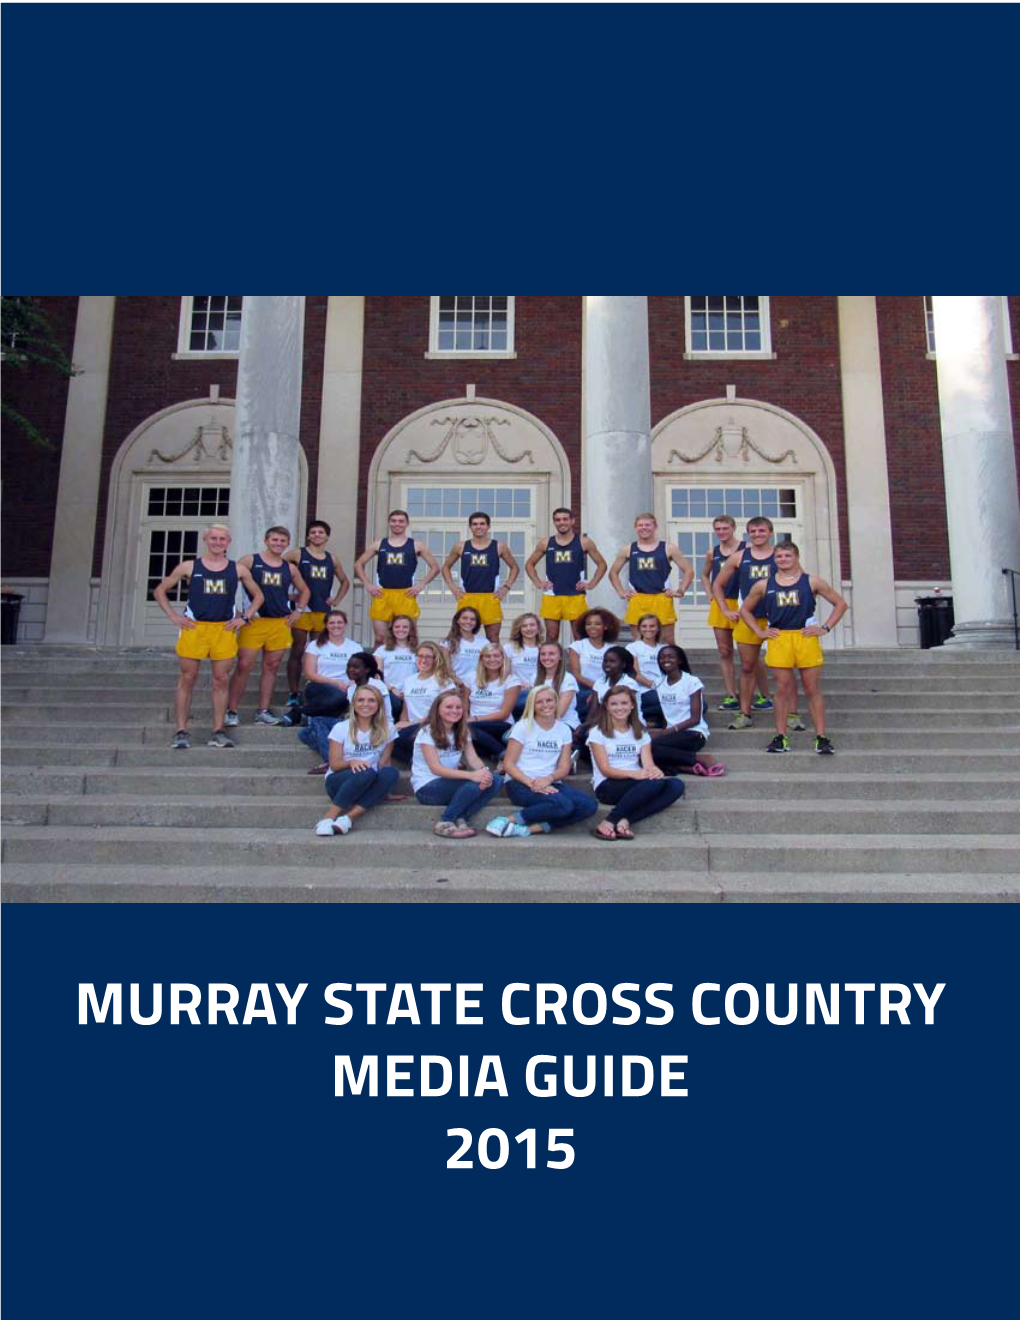 Murray State Cross Country Media Guide 2015 TABLE of CONTENTS 2015 QUICK FACTS Quick Facts